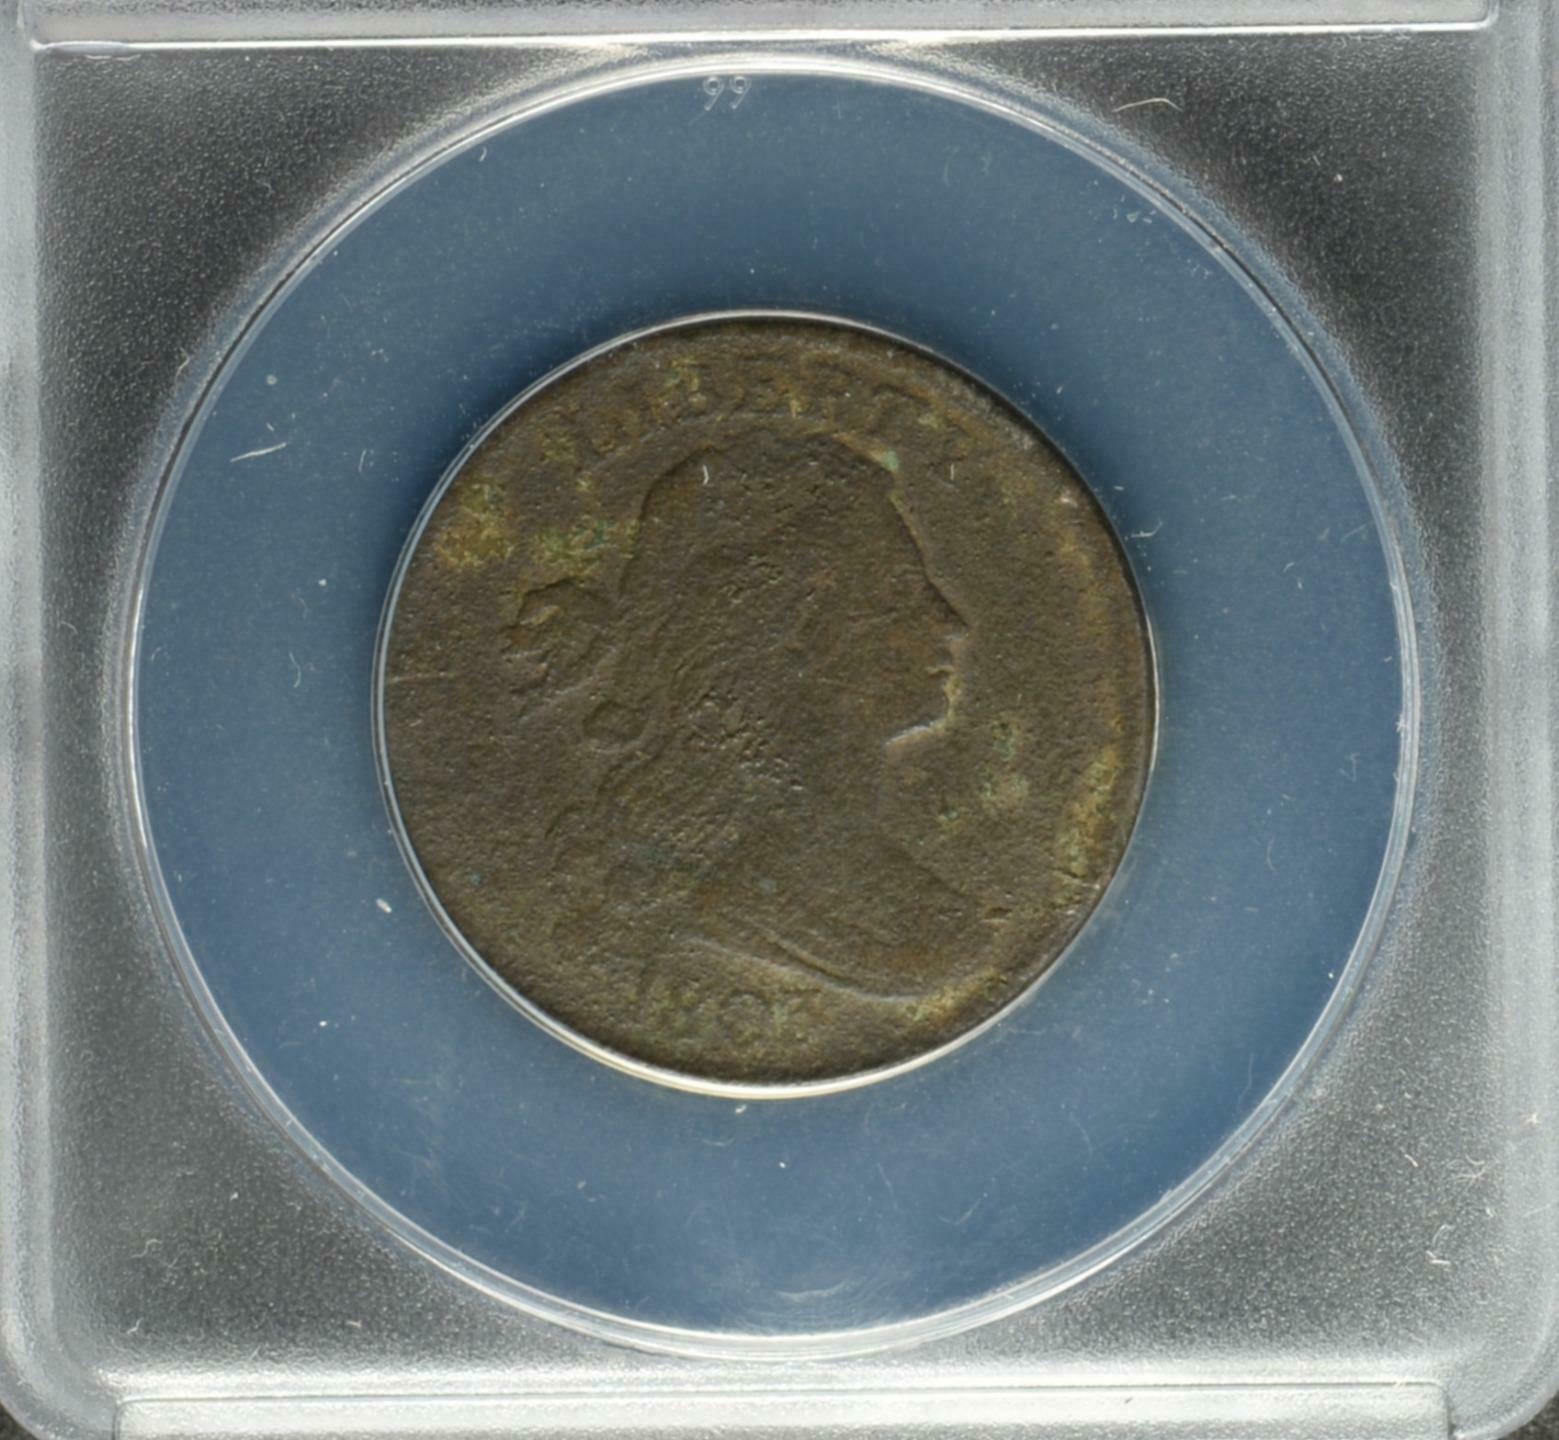 1803 LARGE CENT SMALL DATE LARGE FRACTION ANACS CERTIFIED VF20 CORRODED #7319